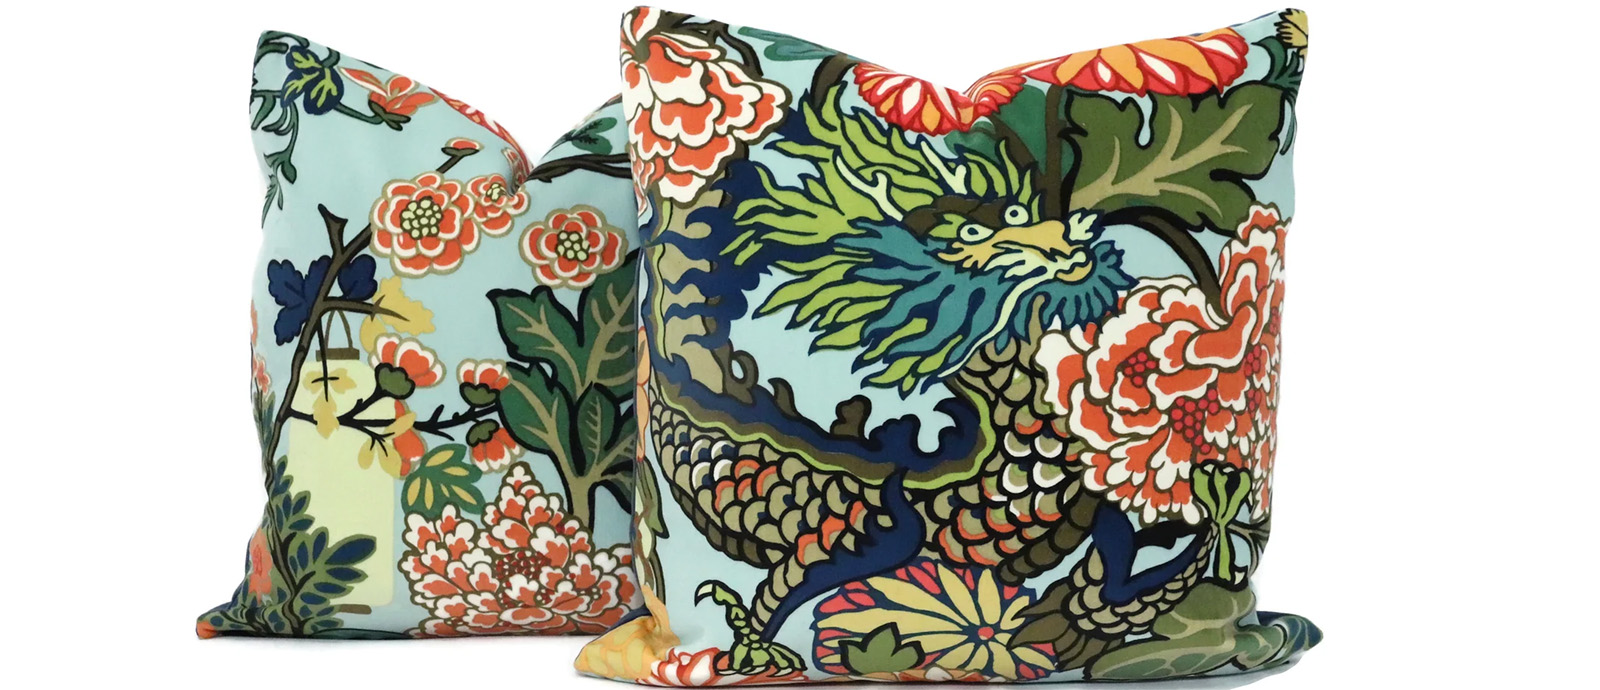 Two colorful pillows with an asian floral and dragon theme print